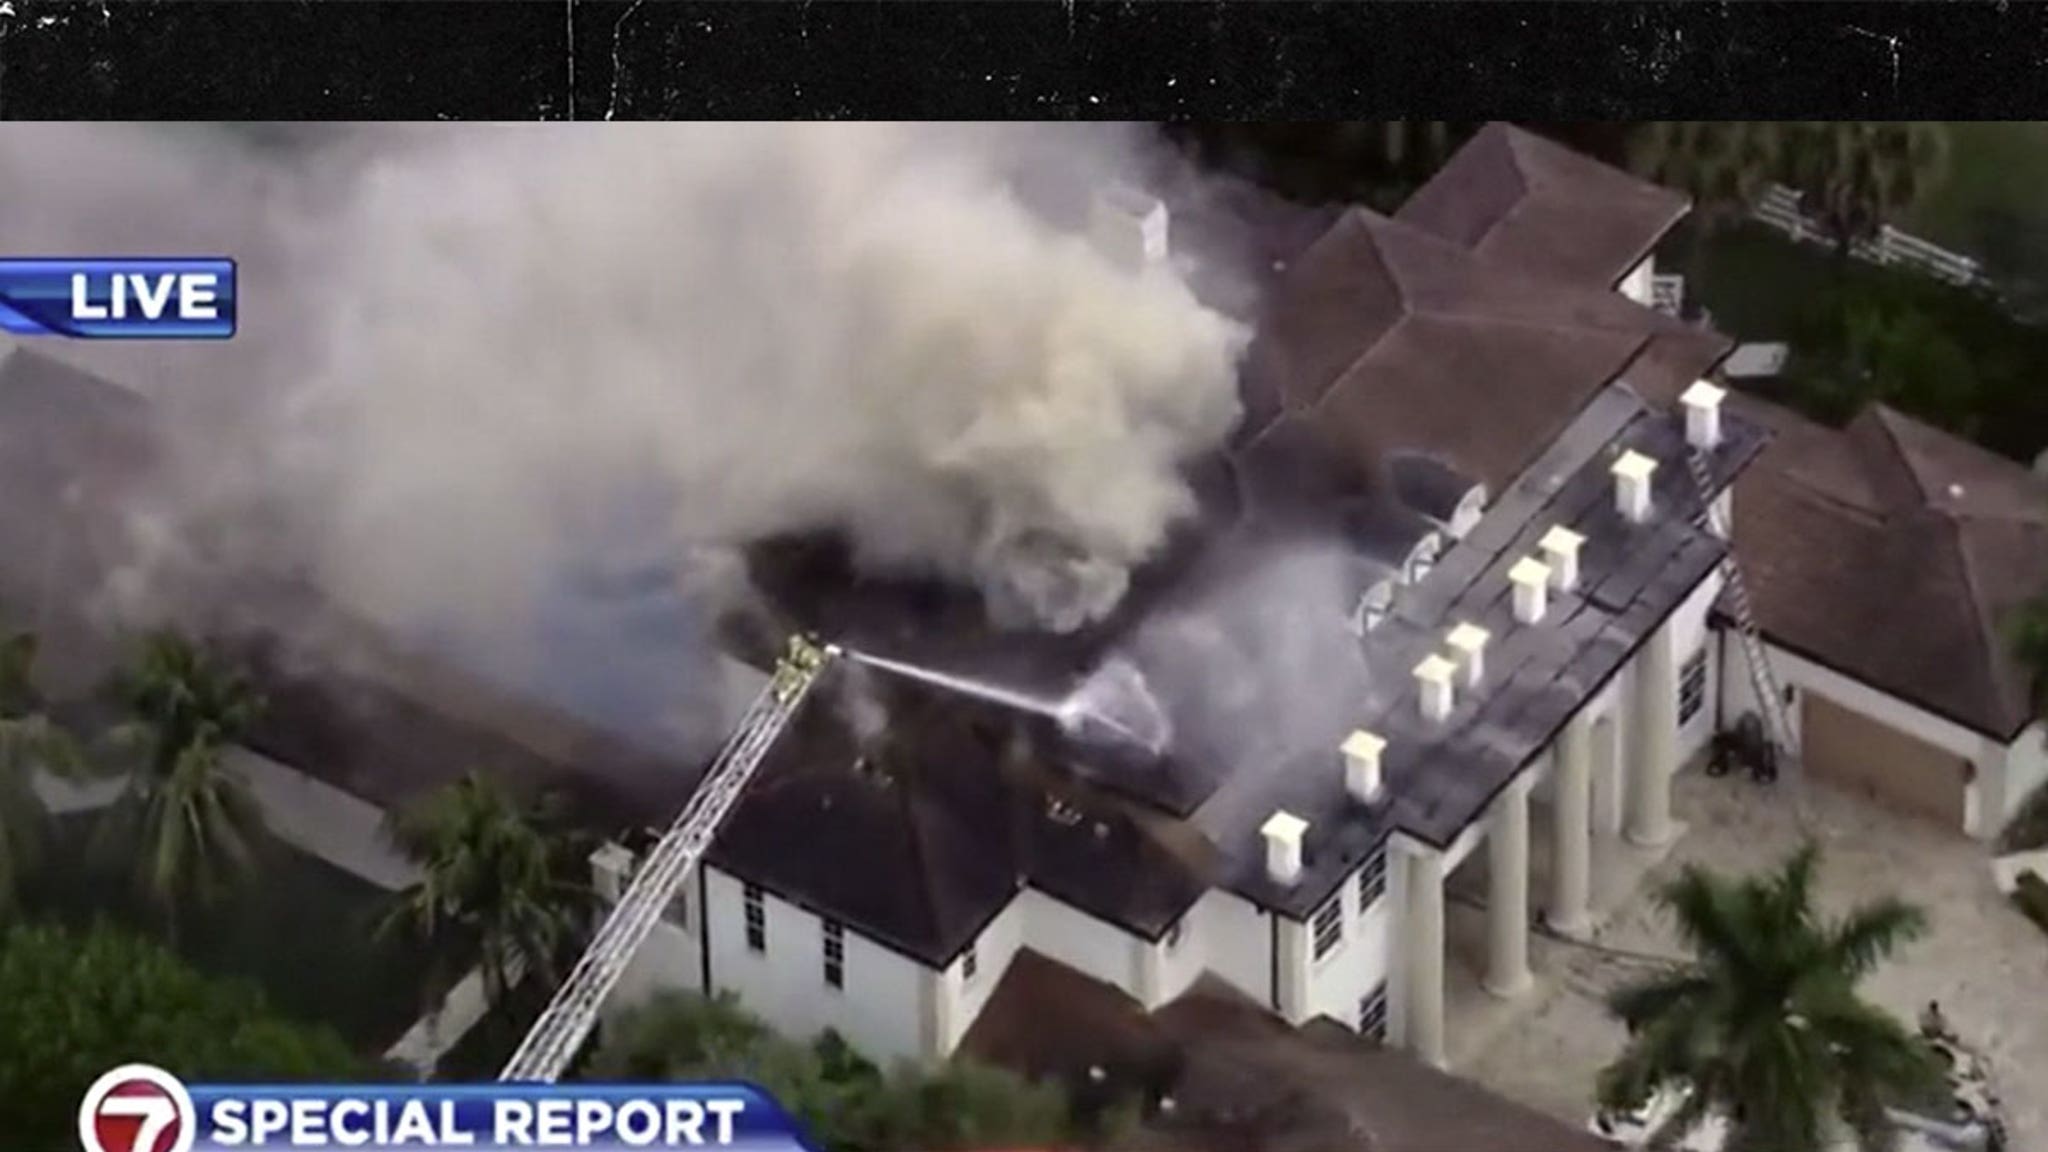 Tyreek Hill's Florida home catches fire, rescue crews work to put out flames